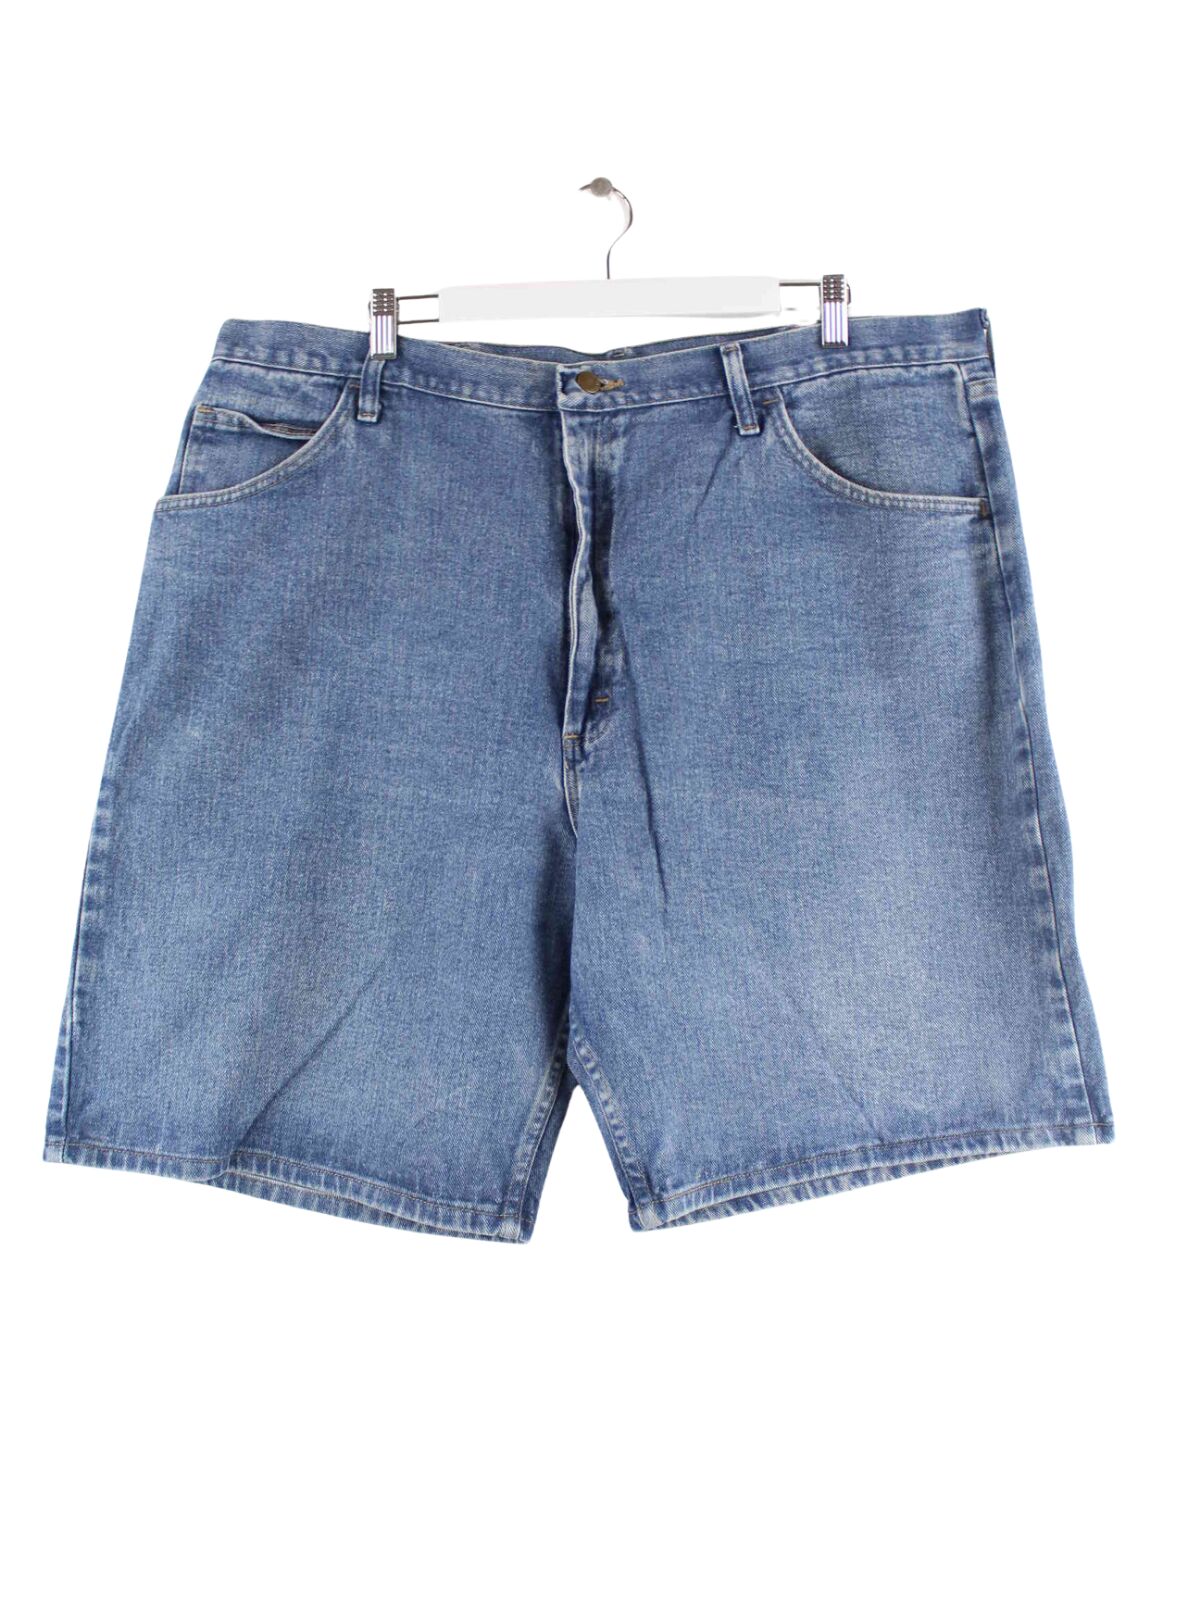 Wrangler Relaxed Fit Jeans Shorts Blau W42 (front image)